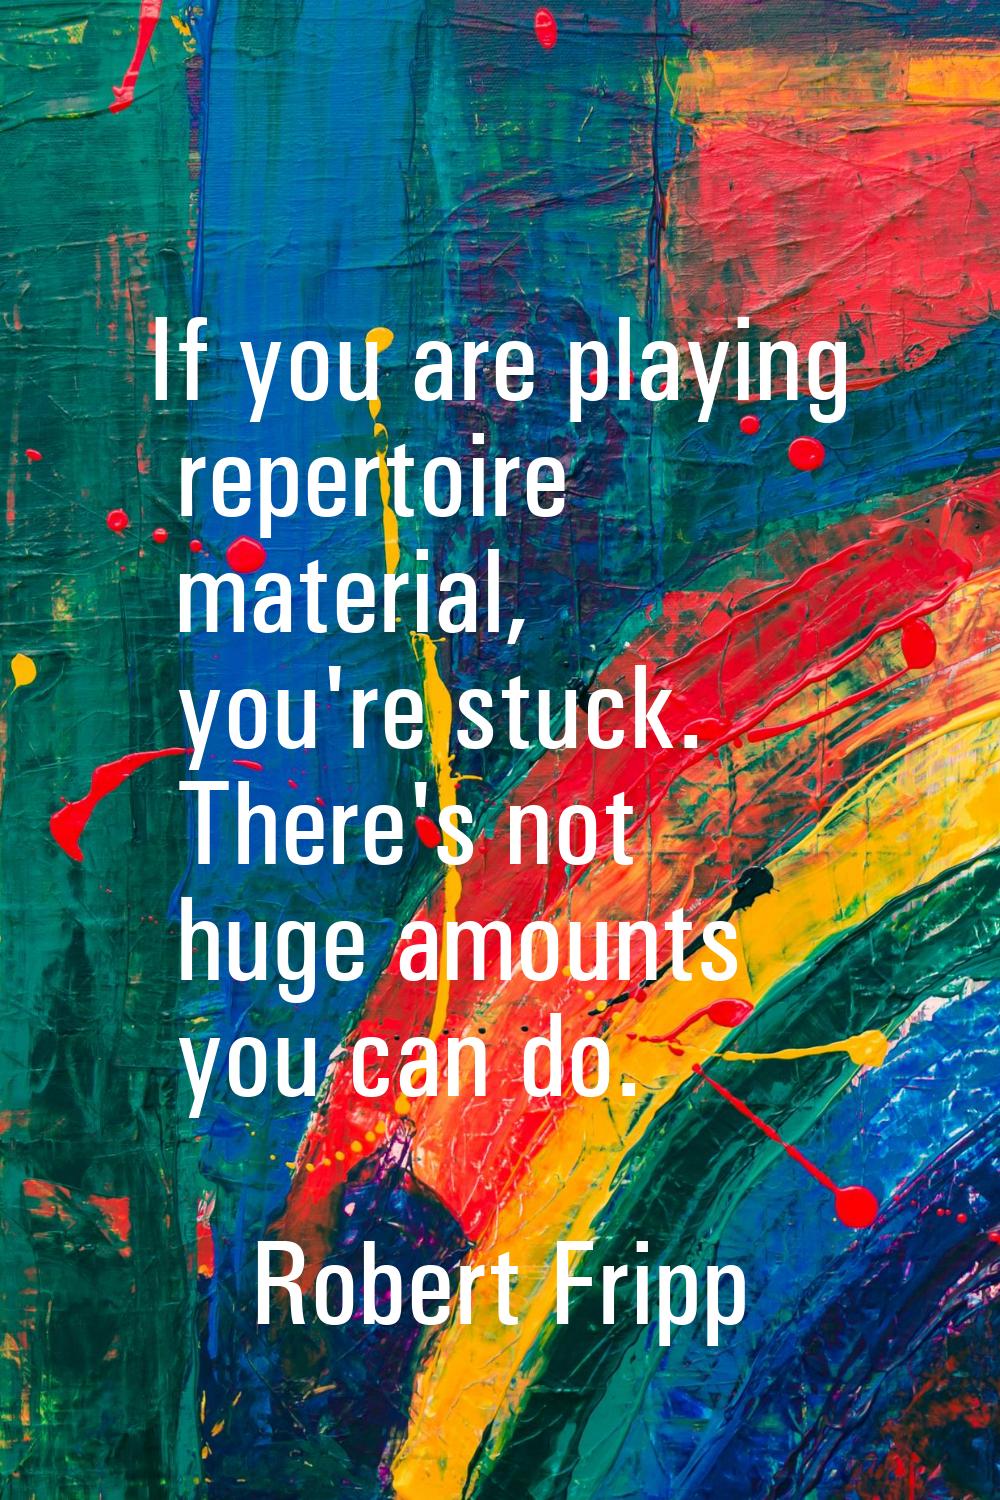 If you are playing repertoire material, you're stuck. There's not huge amounts you can do.